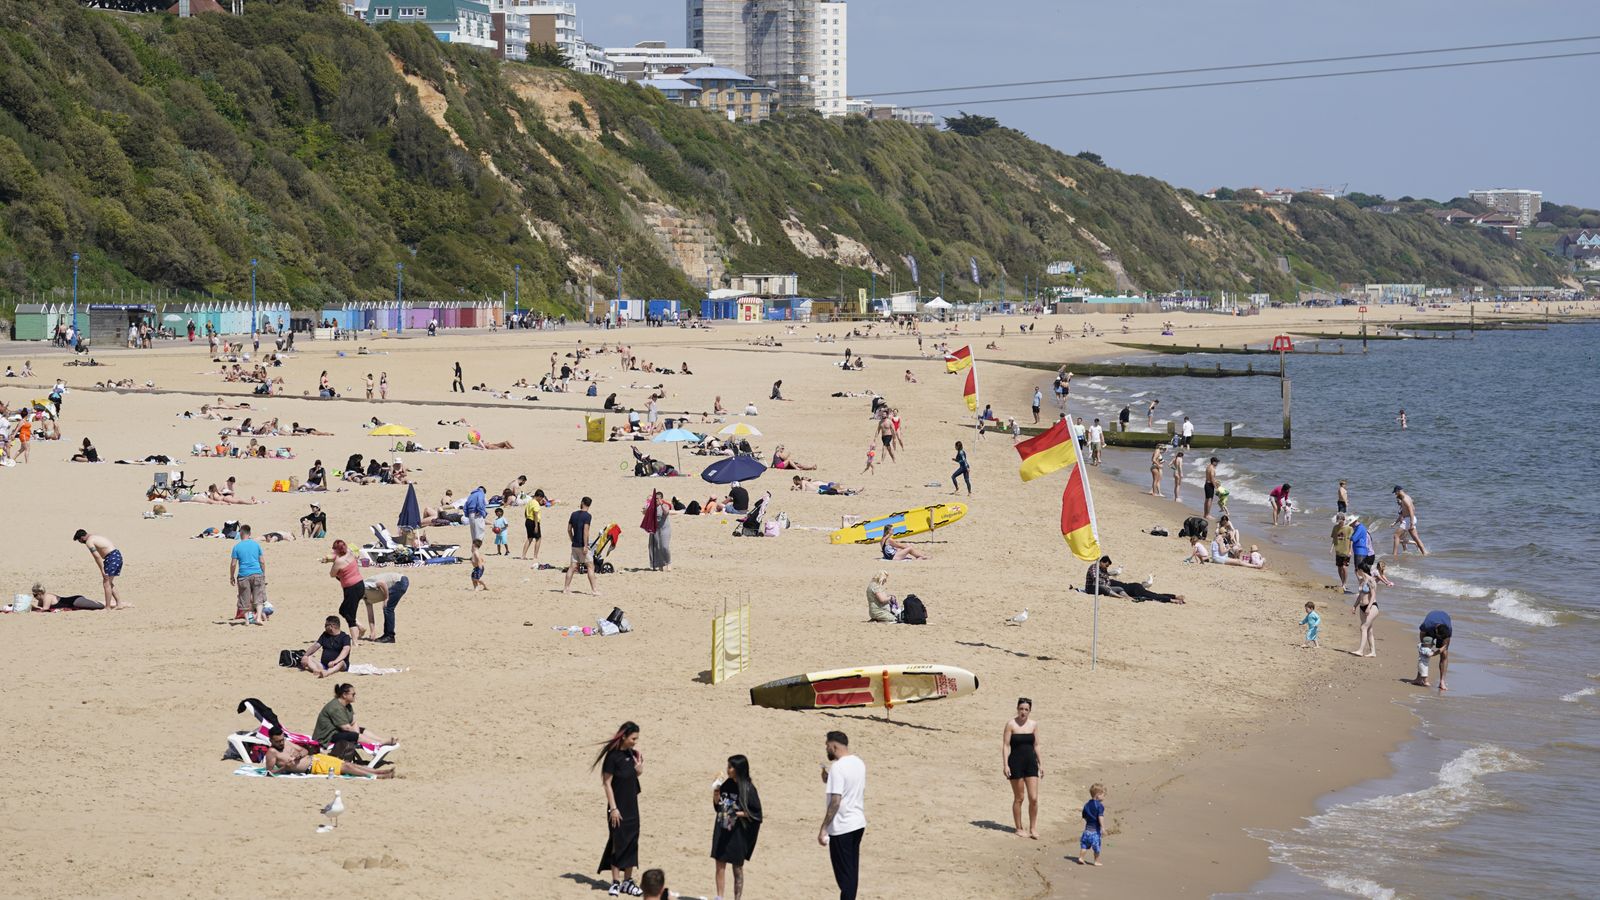 Bank holiday weekend could see hottest day of the year so far with sunny weather for 'vast majority' of UK